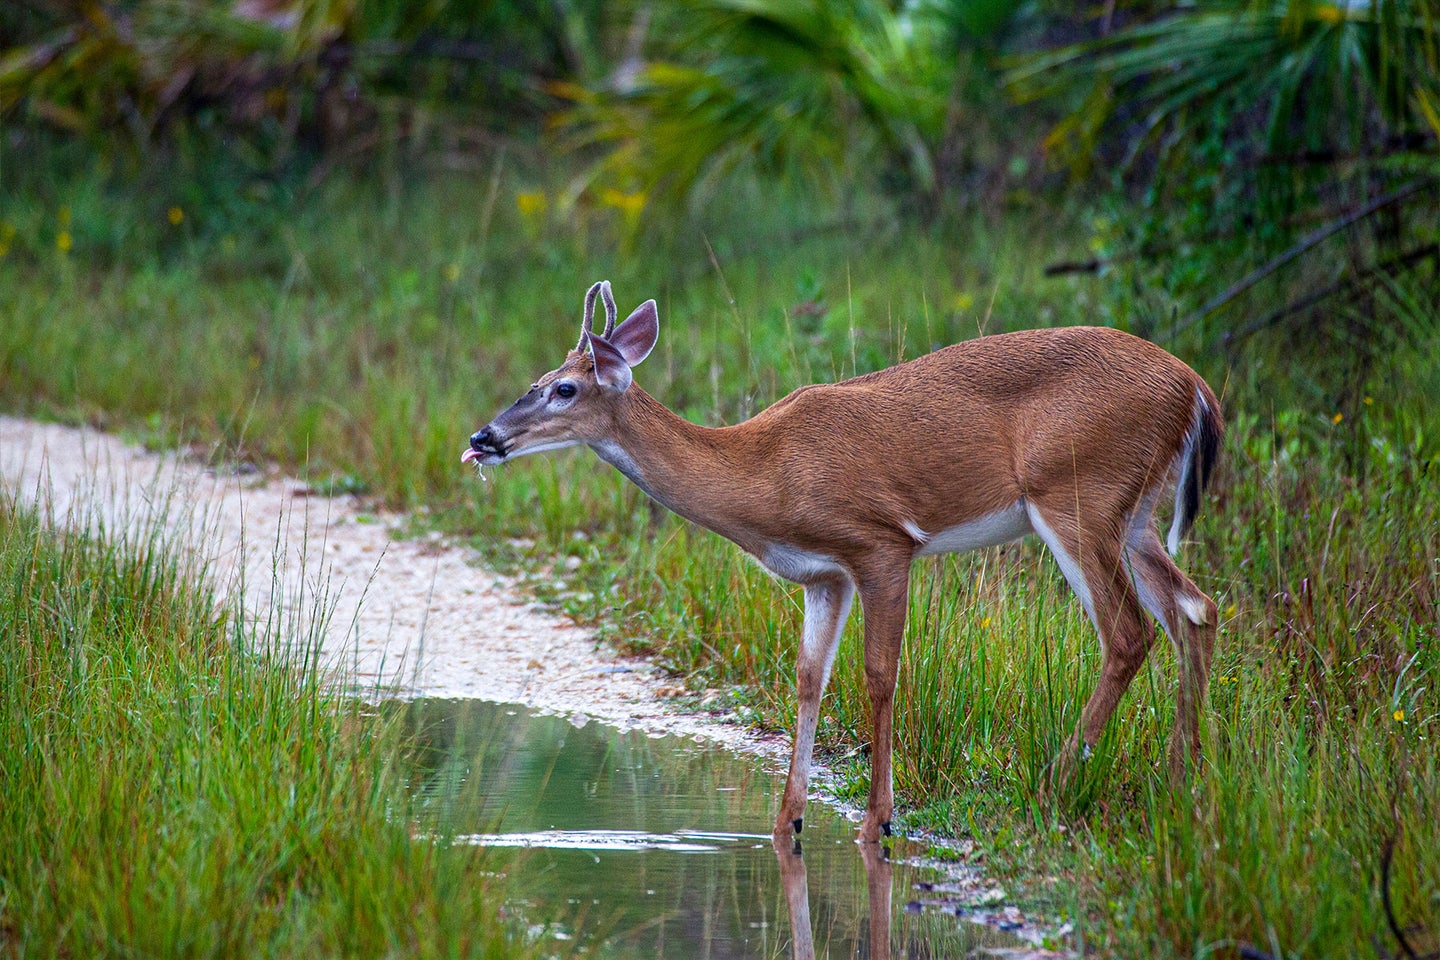 Florida is the 32nd state to find chronic wasting disease since it was first discovered in 1967.